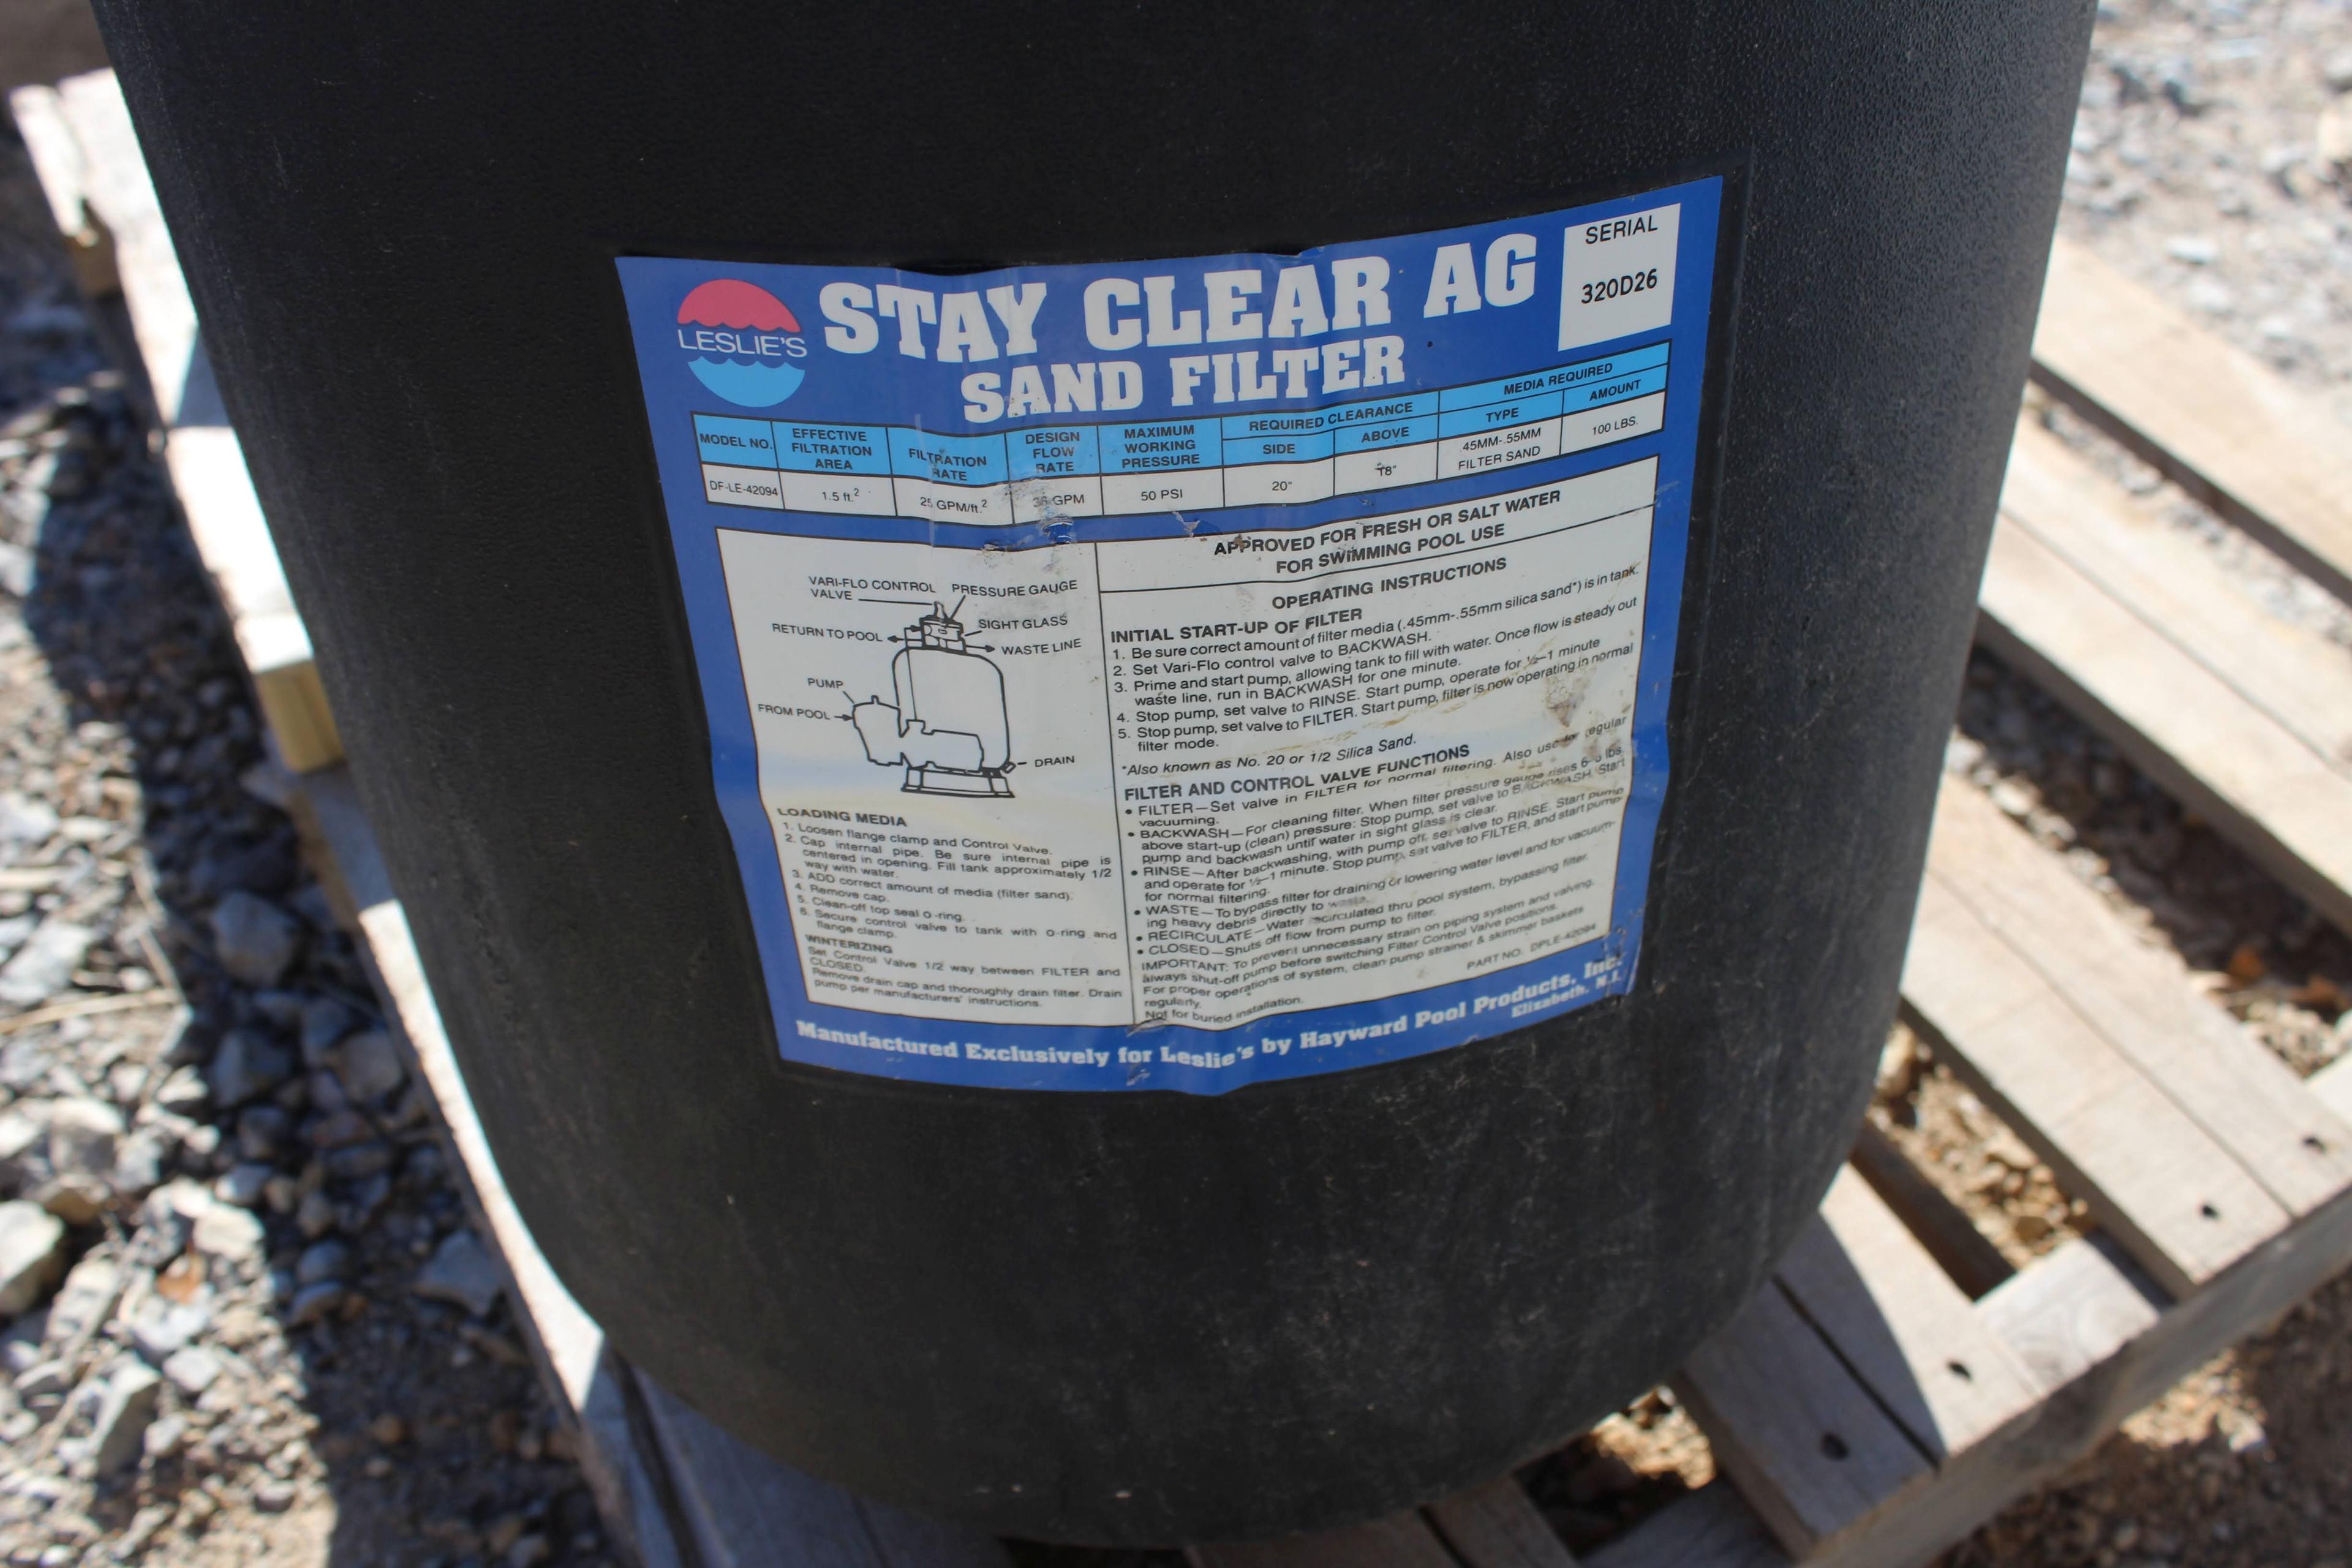 Leslie's Stay Clear AG Sand Filter